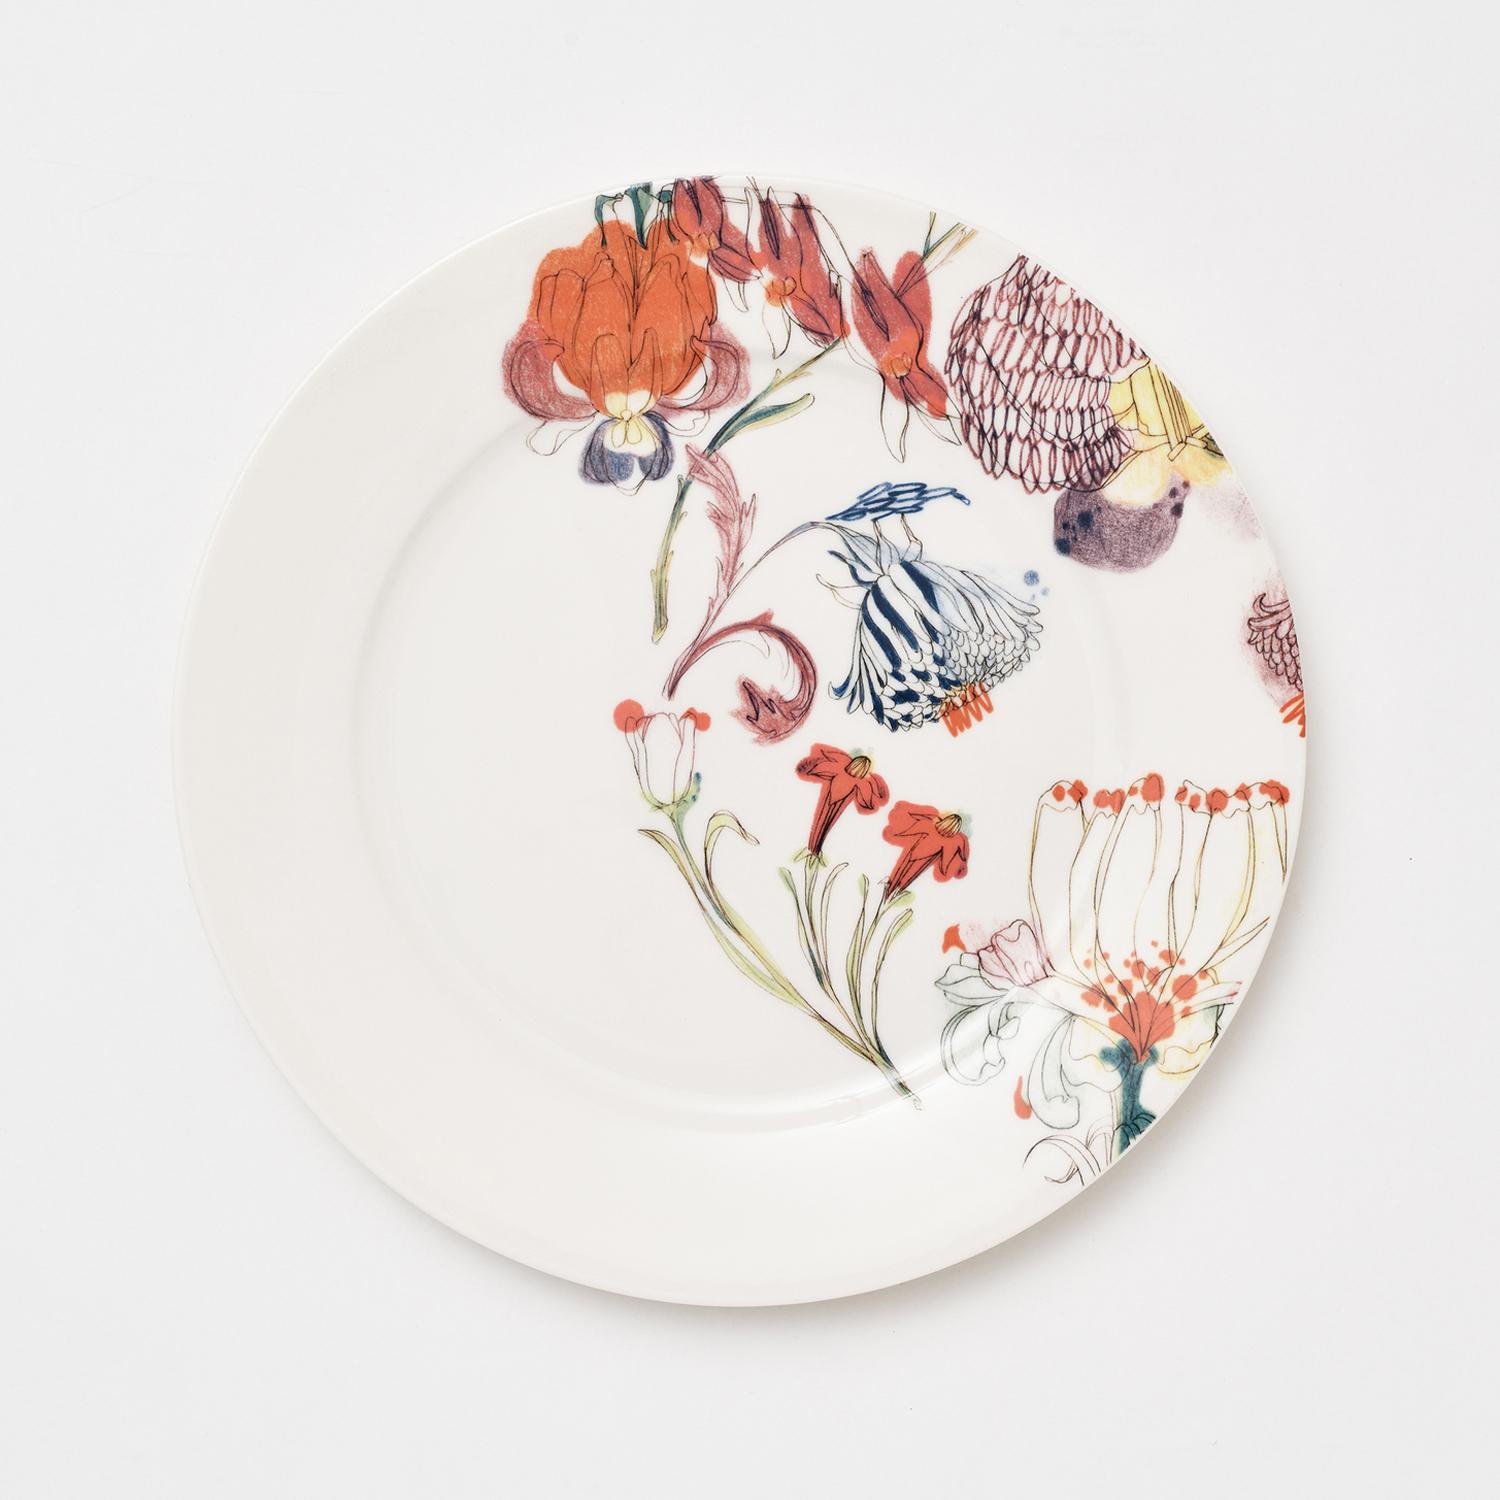 Belonging to the Grandma's Garden porcelain series, the design of these dinner plates represents a sophisticated and elegant floral designs full of blossoms and buds with delicate colors blending together for a fresh and contemporary look, typical